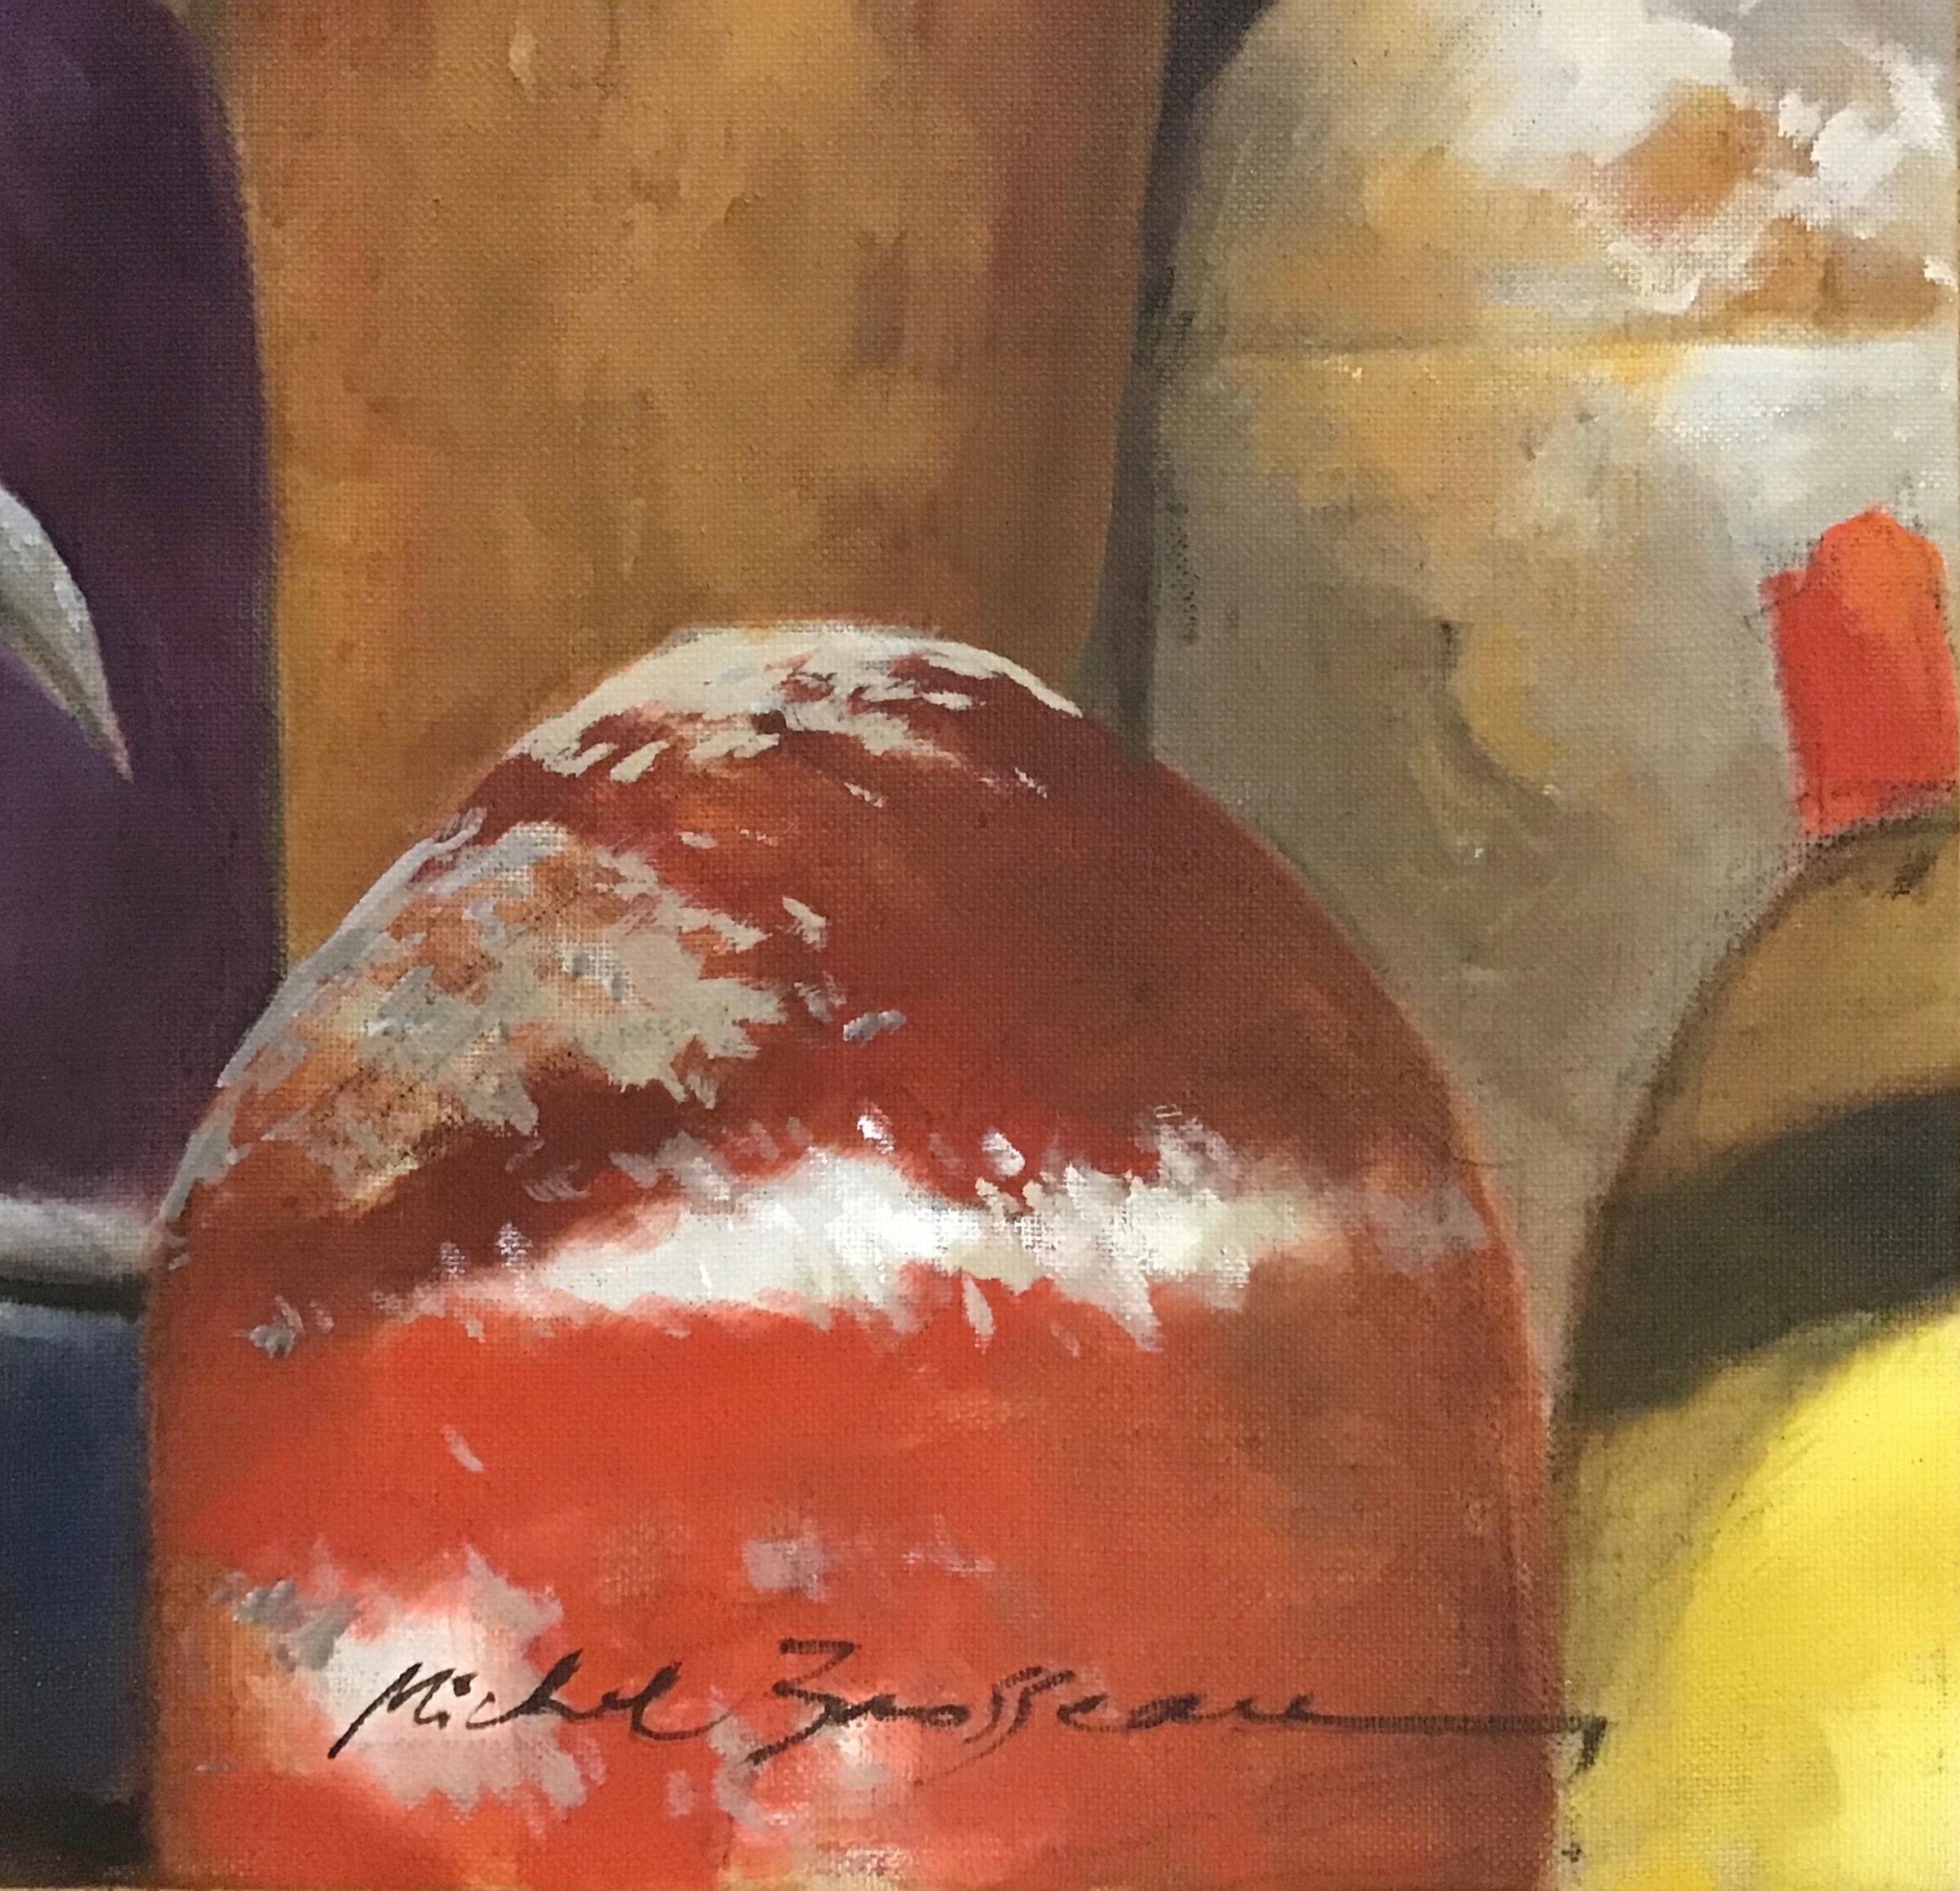 Oil painting of red, orange and yellow buoys.

Michel Brosseau was born in Nantes and has lived in Bordeaux for many years. Both cities are on the Atlantic coast of France and have rich maritime histories, highlighted by prosperous trade with the